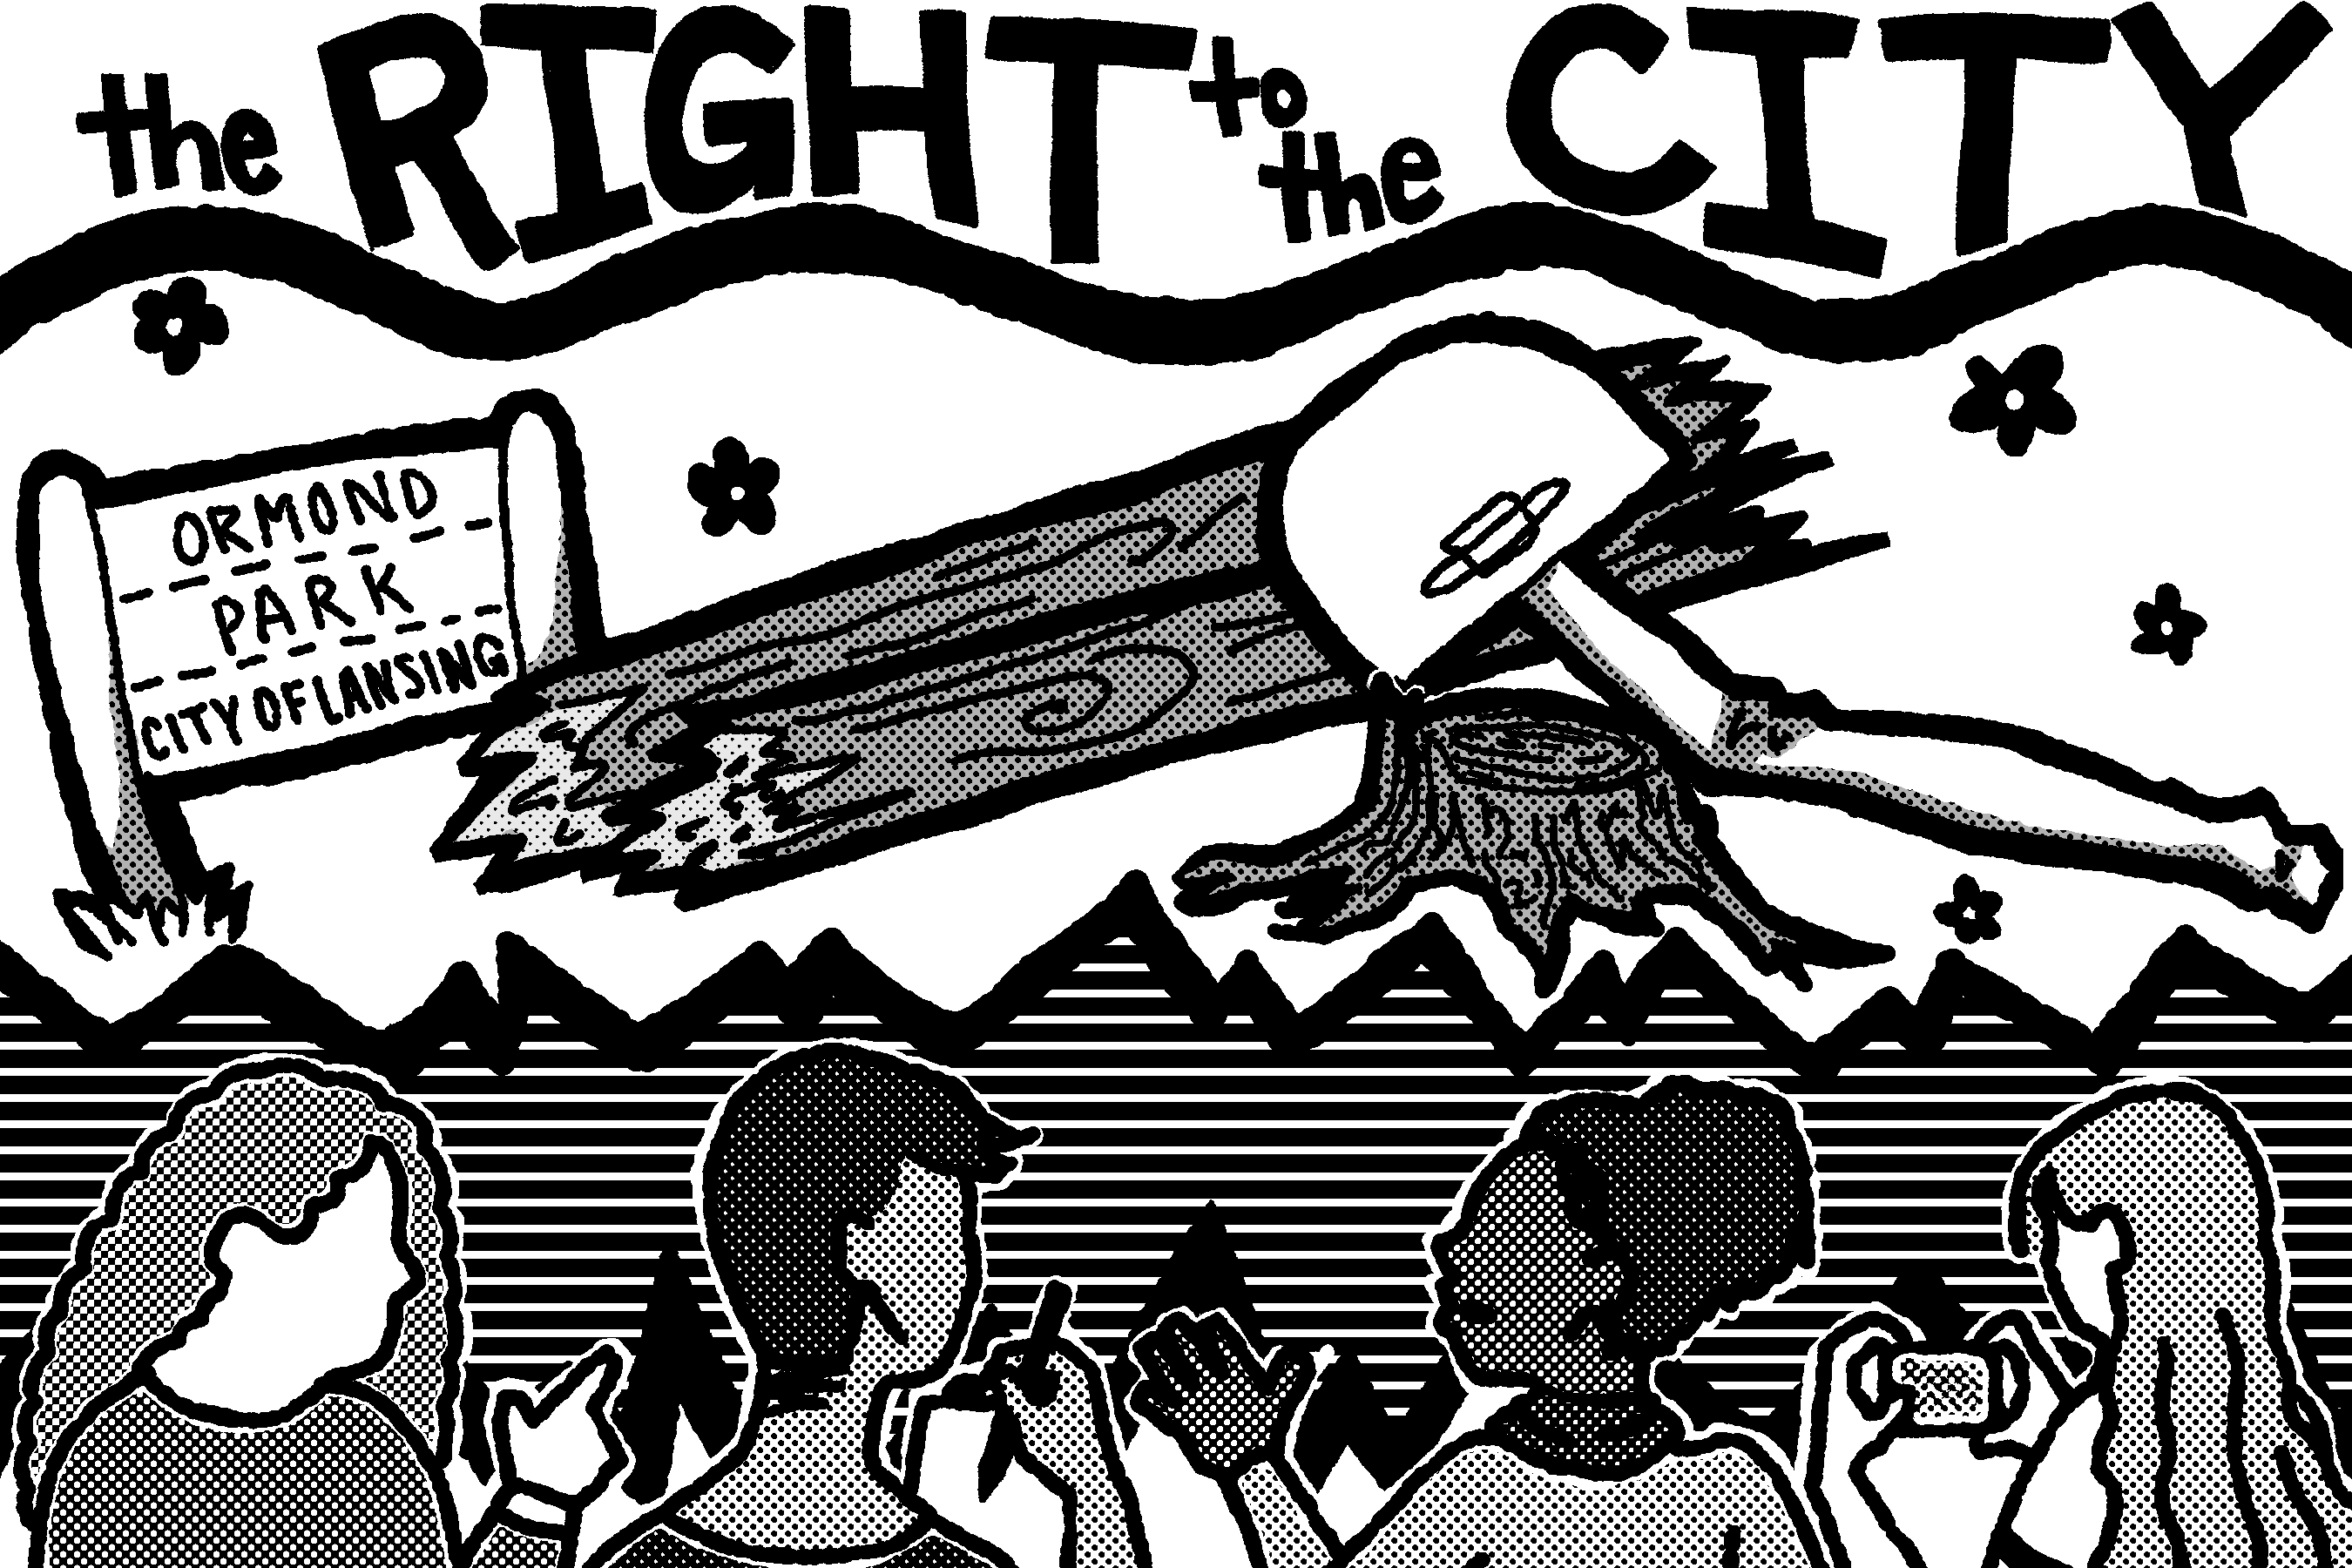 Image is an illustration representing students shown at the bottom of the image discussing a scene of demolition of a local park with the words "The Right to the City" on top.